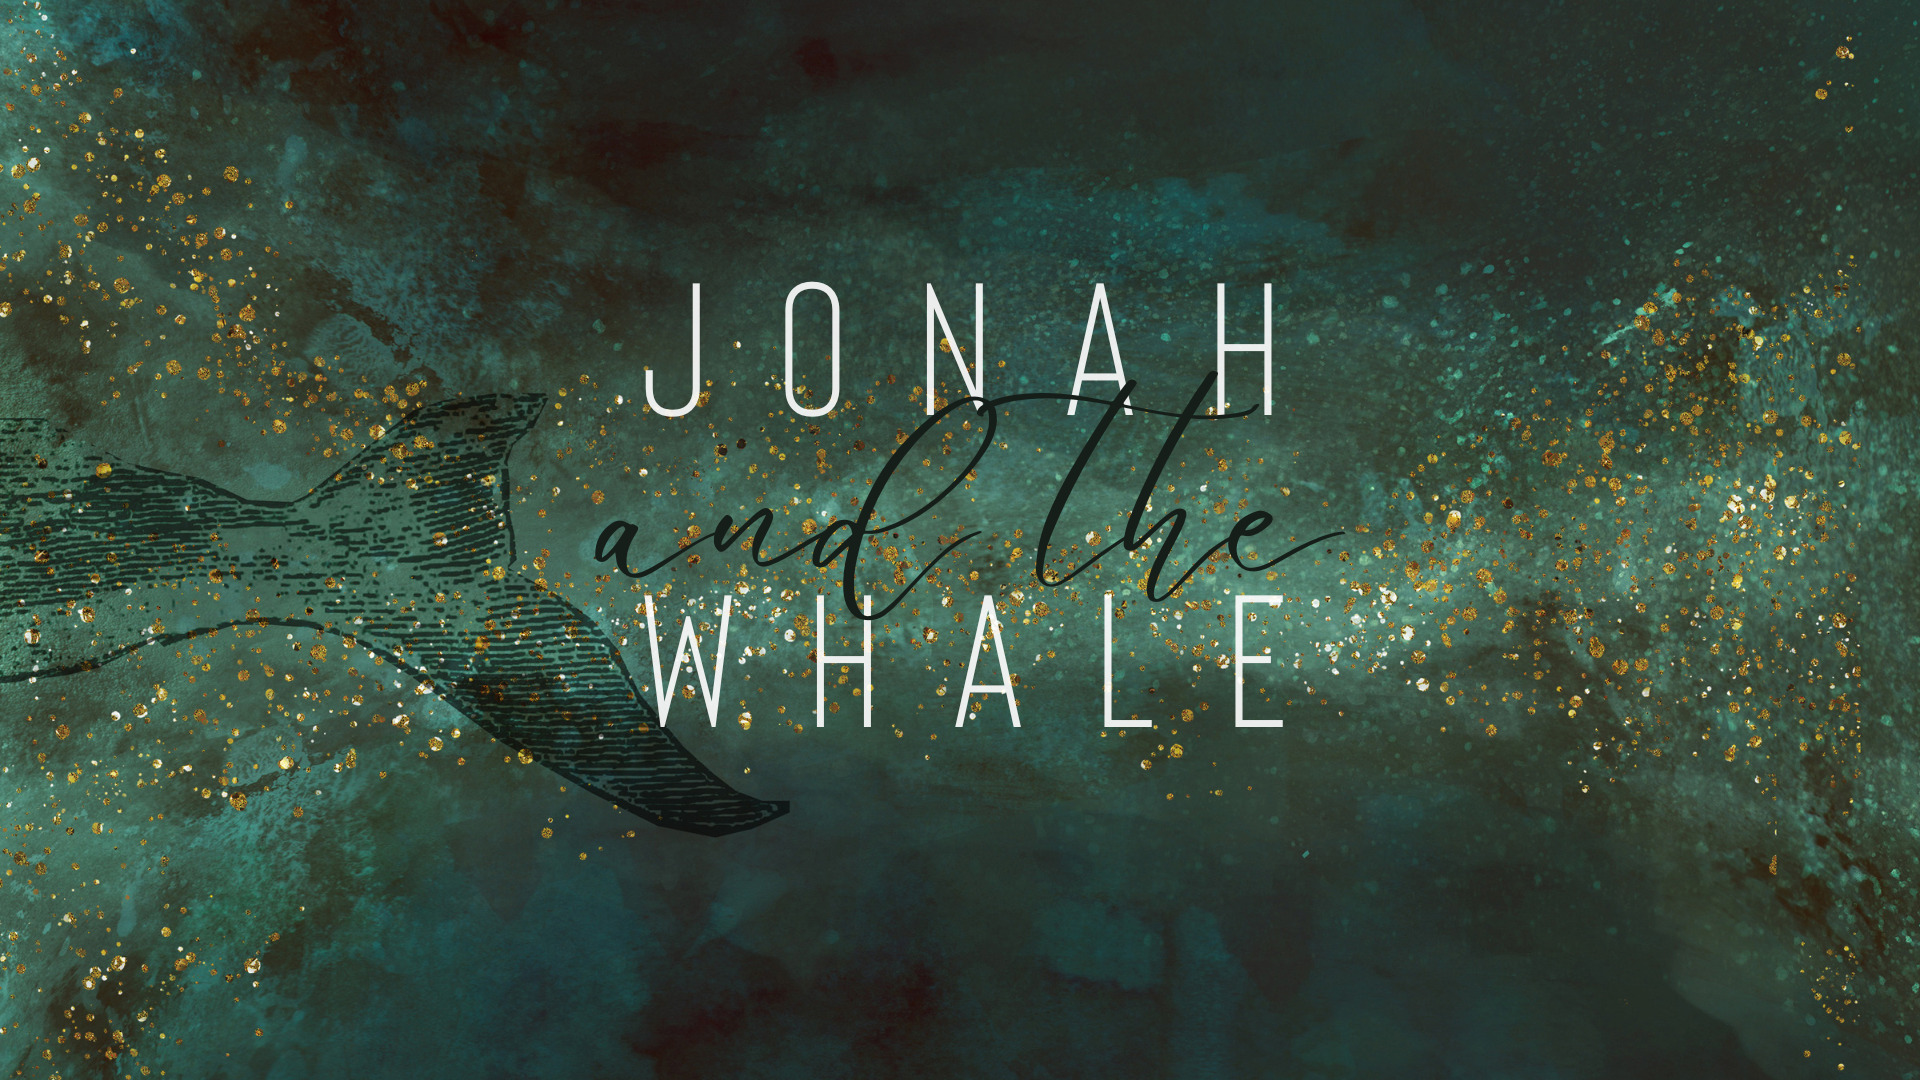 Jonah And The Whale 4K 3840 × 2160 Px | Remix Church Media | Editable Design Templates And Resources Made For The Church.